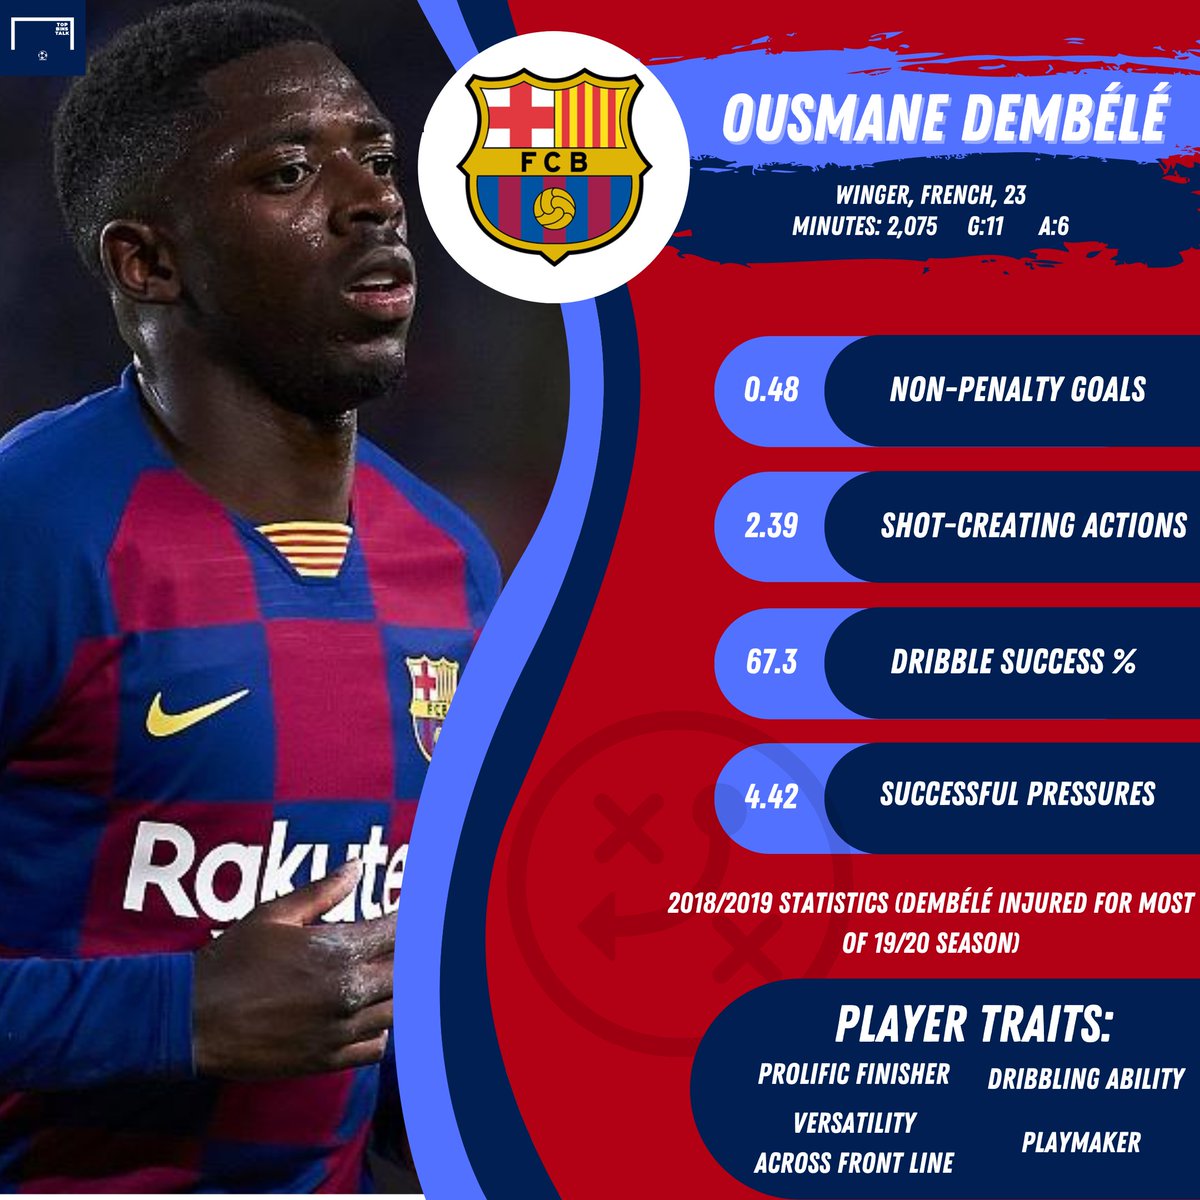 Dream: Ousmane DembéléIn our opinion, Dembélé is the best alternative of the lot. He's struggled at Barcelona, but a fresh start could help him rediscover his old form. Blessed with devastating pace and two-footed ability, there's not many better when he's on his game.